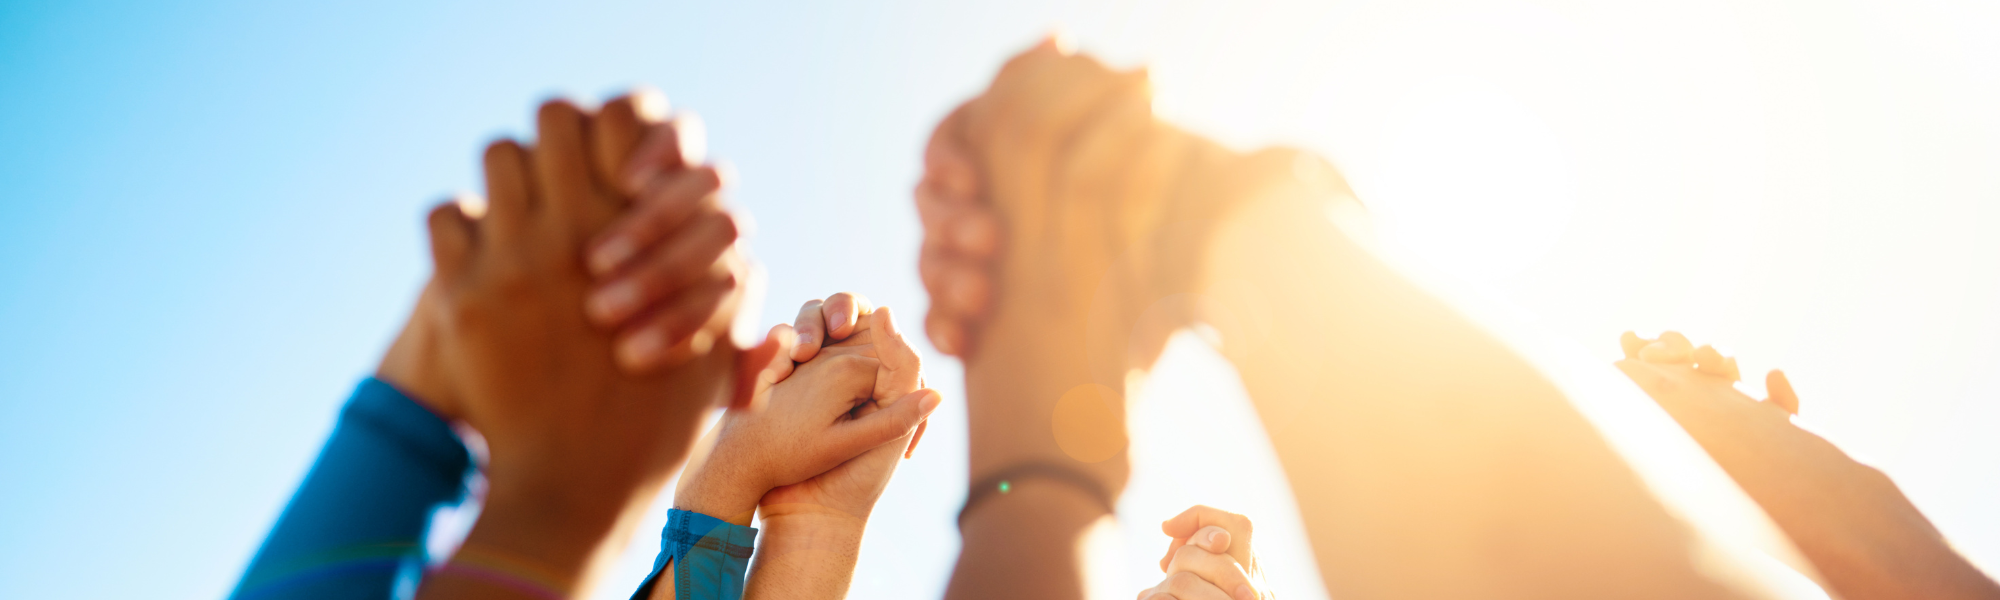 A stock photo of people's joined hands against a blue sky. The people are standing in a circle.